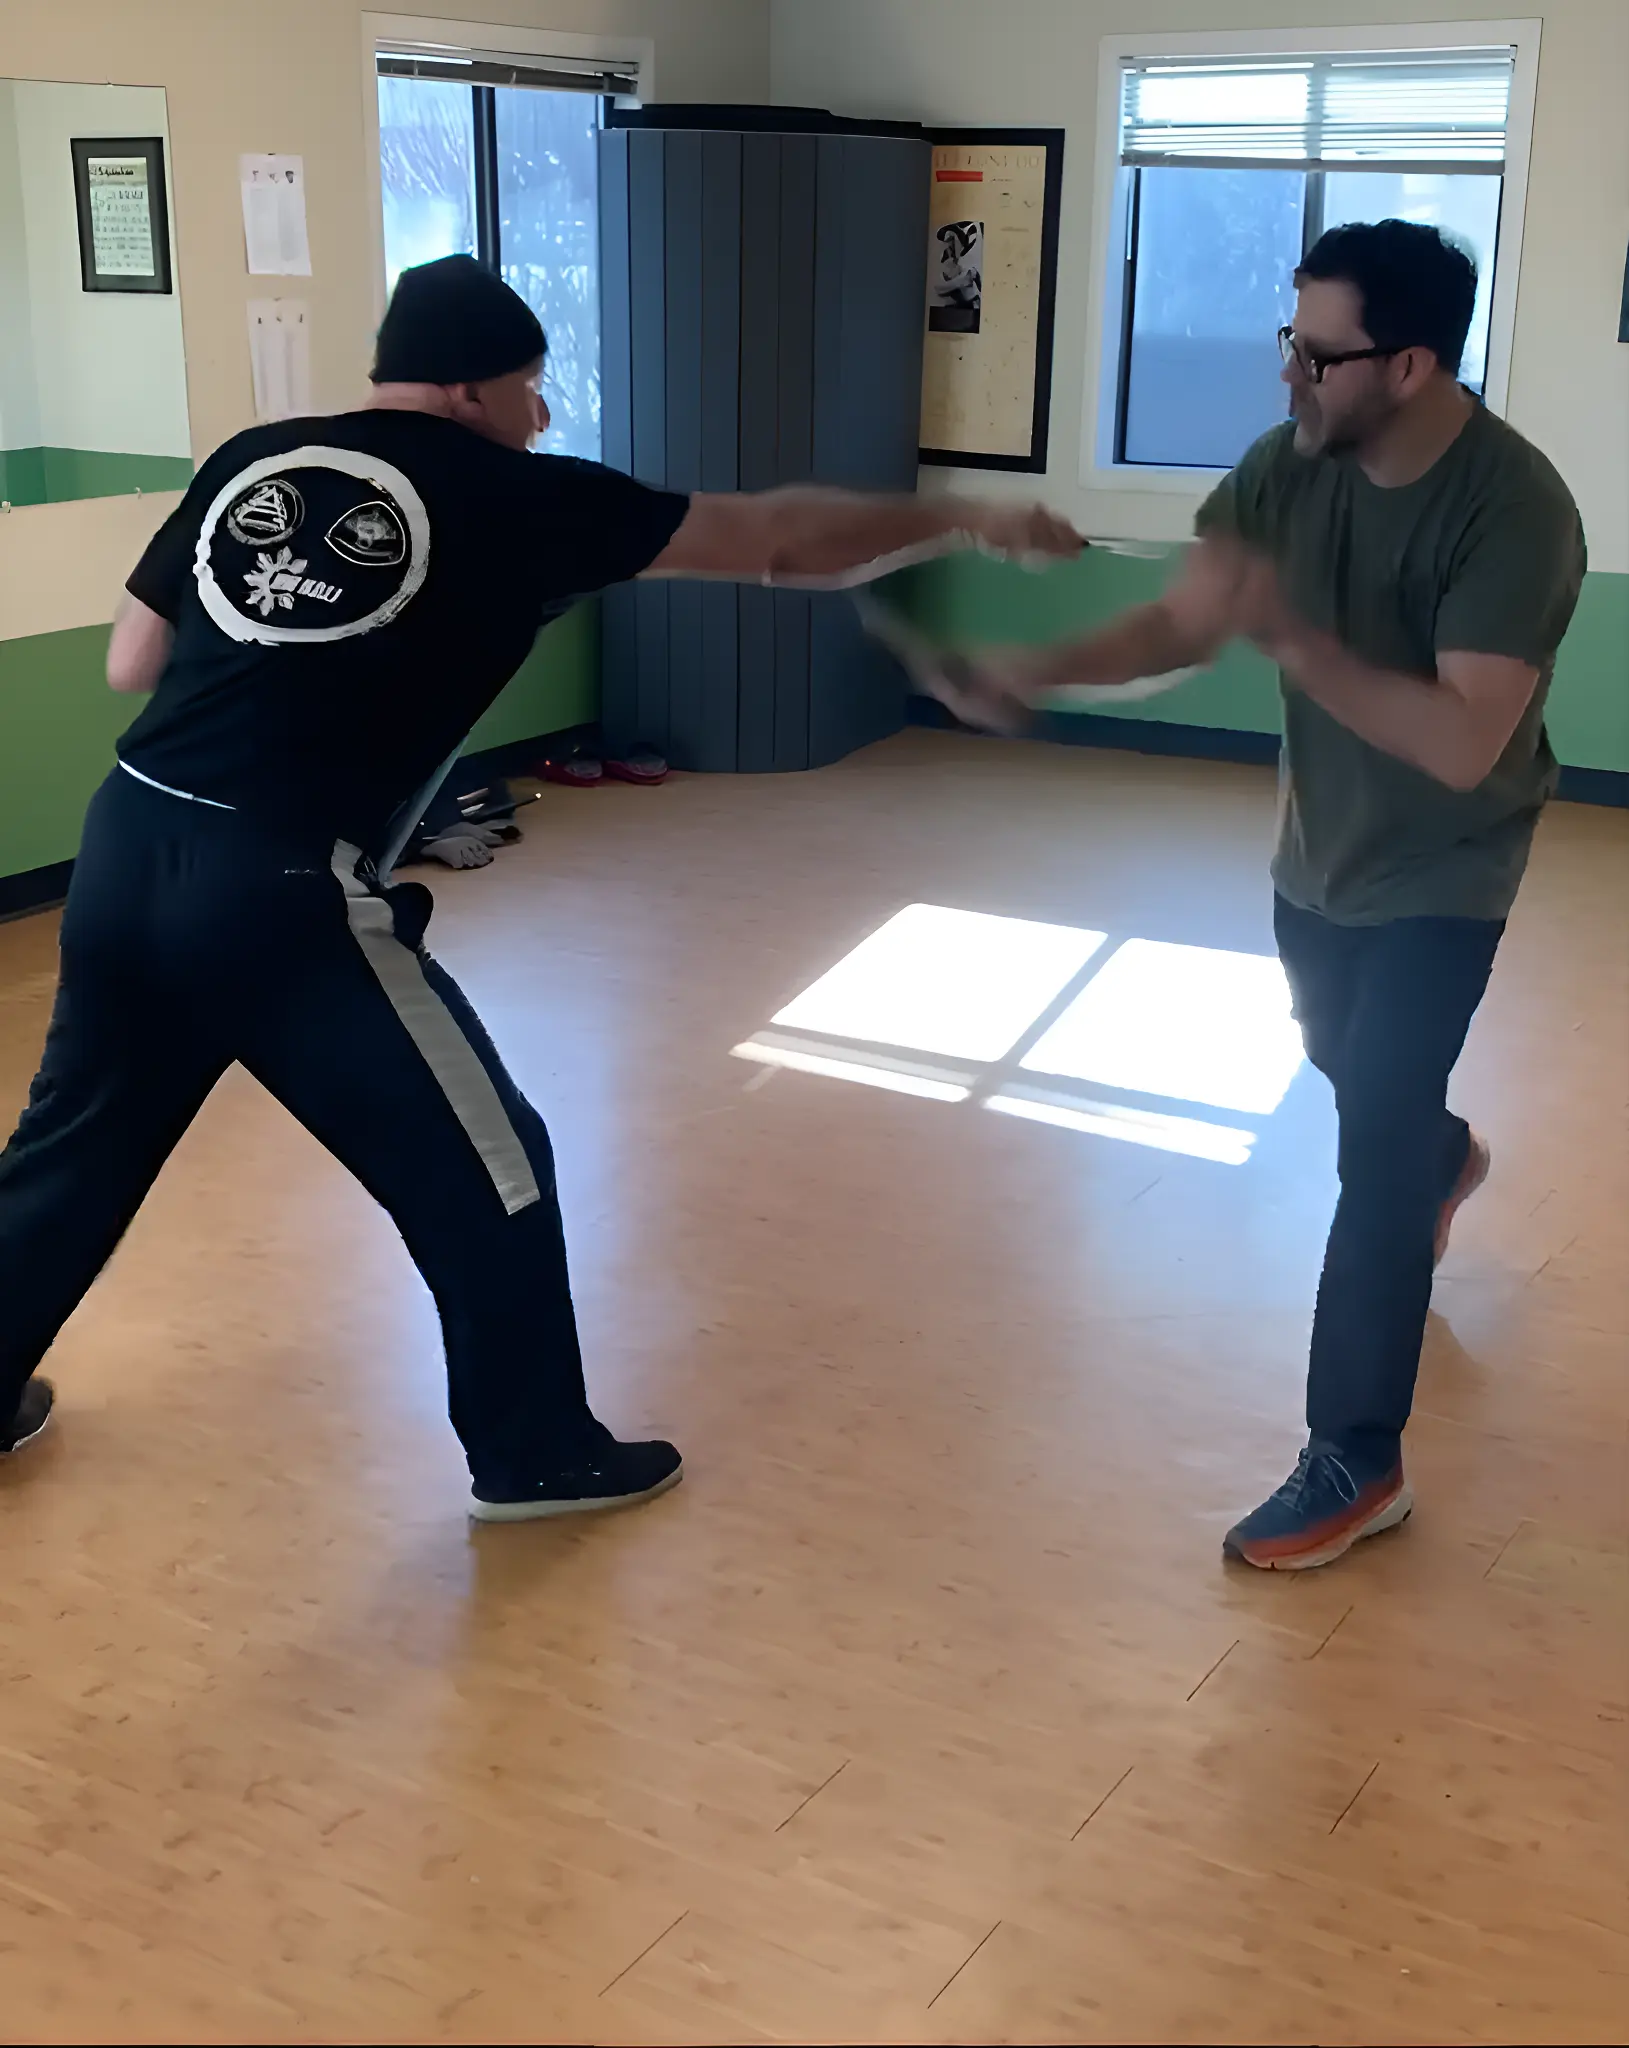 Portland Arnis sparring with Knives at River City Warriors